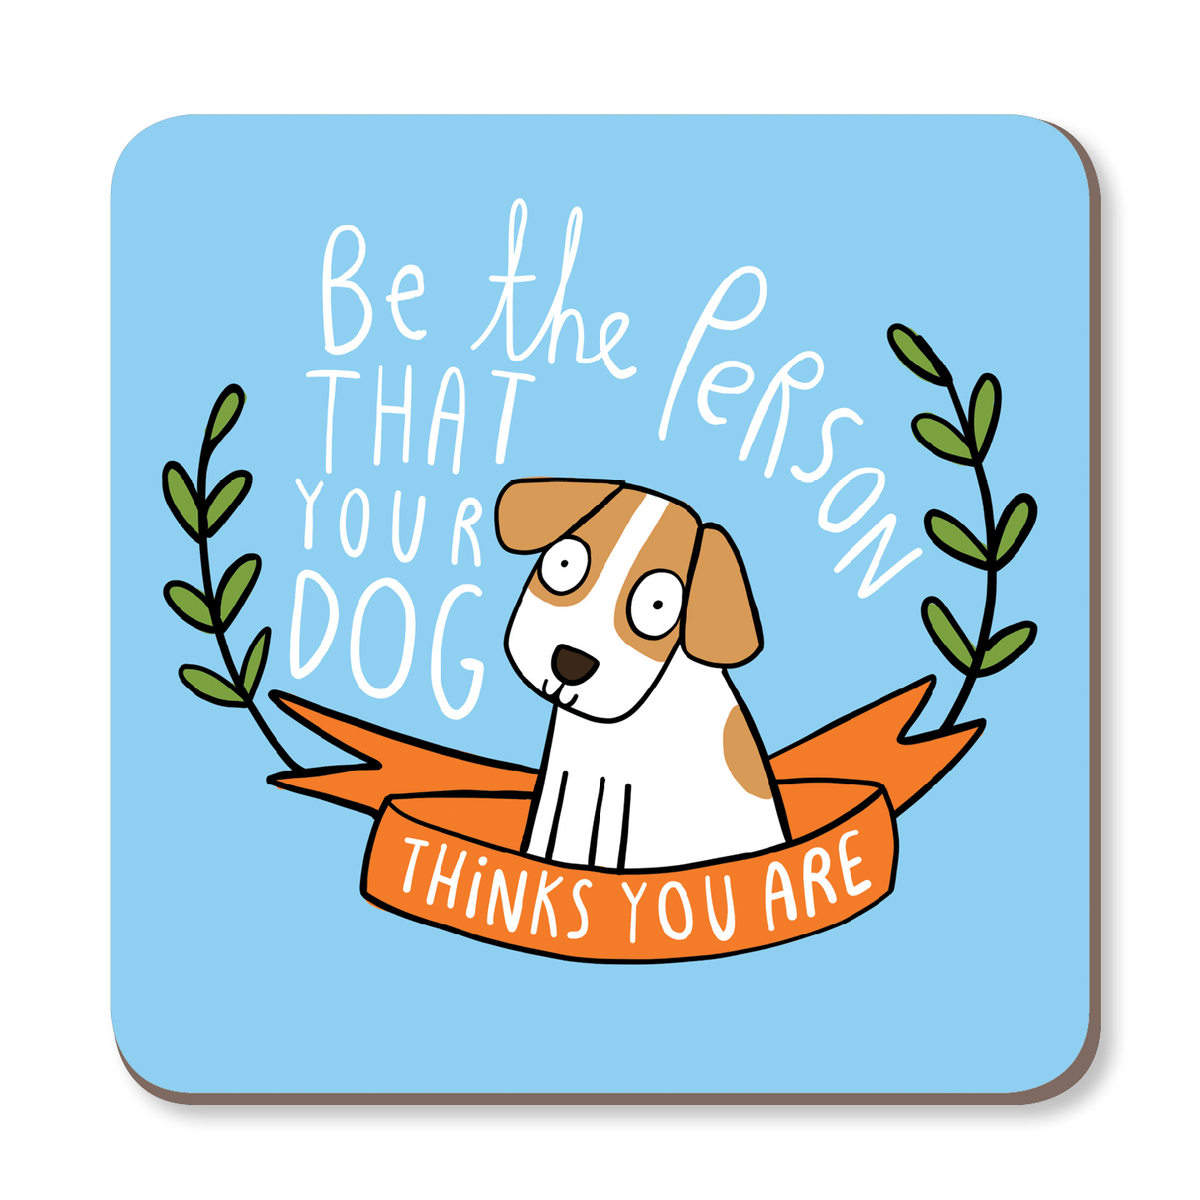 Be The Person You Dog Thinks You Are Coaster by Katie Abey - Whale and Bird